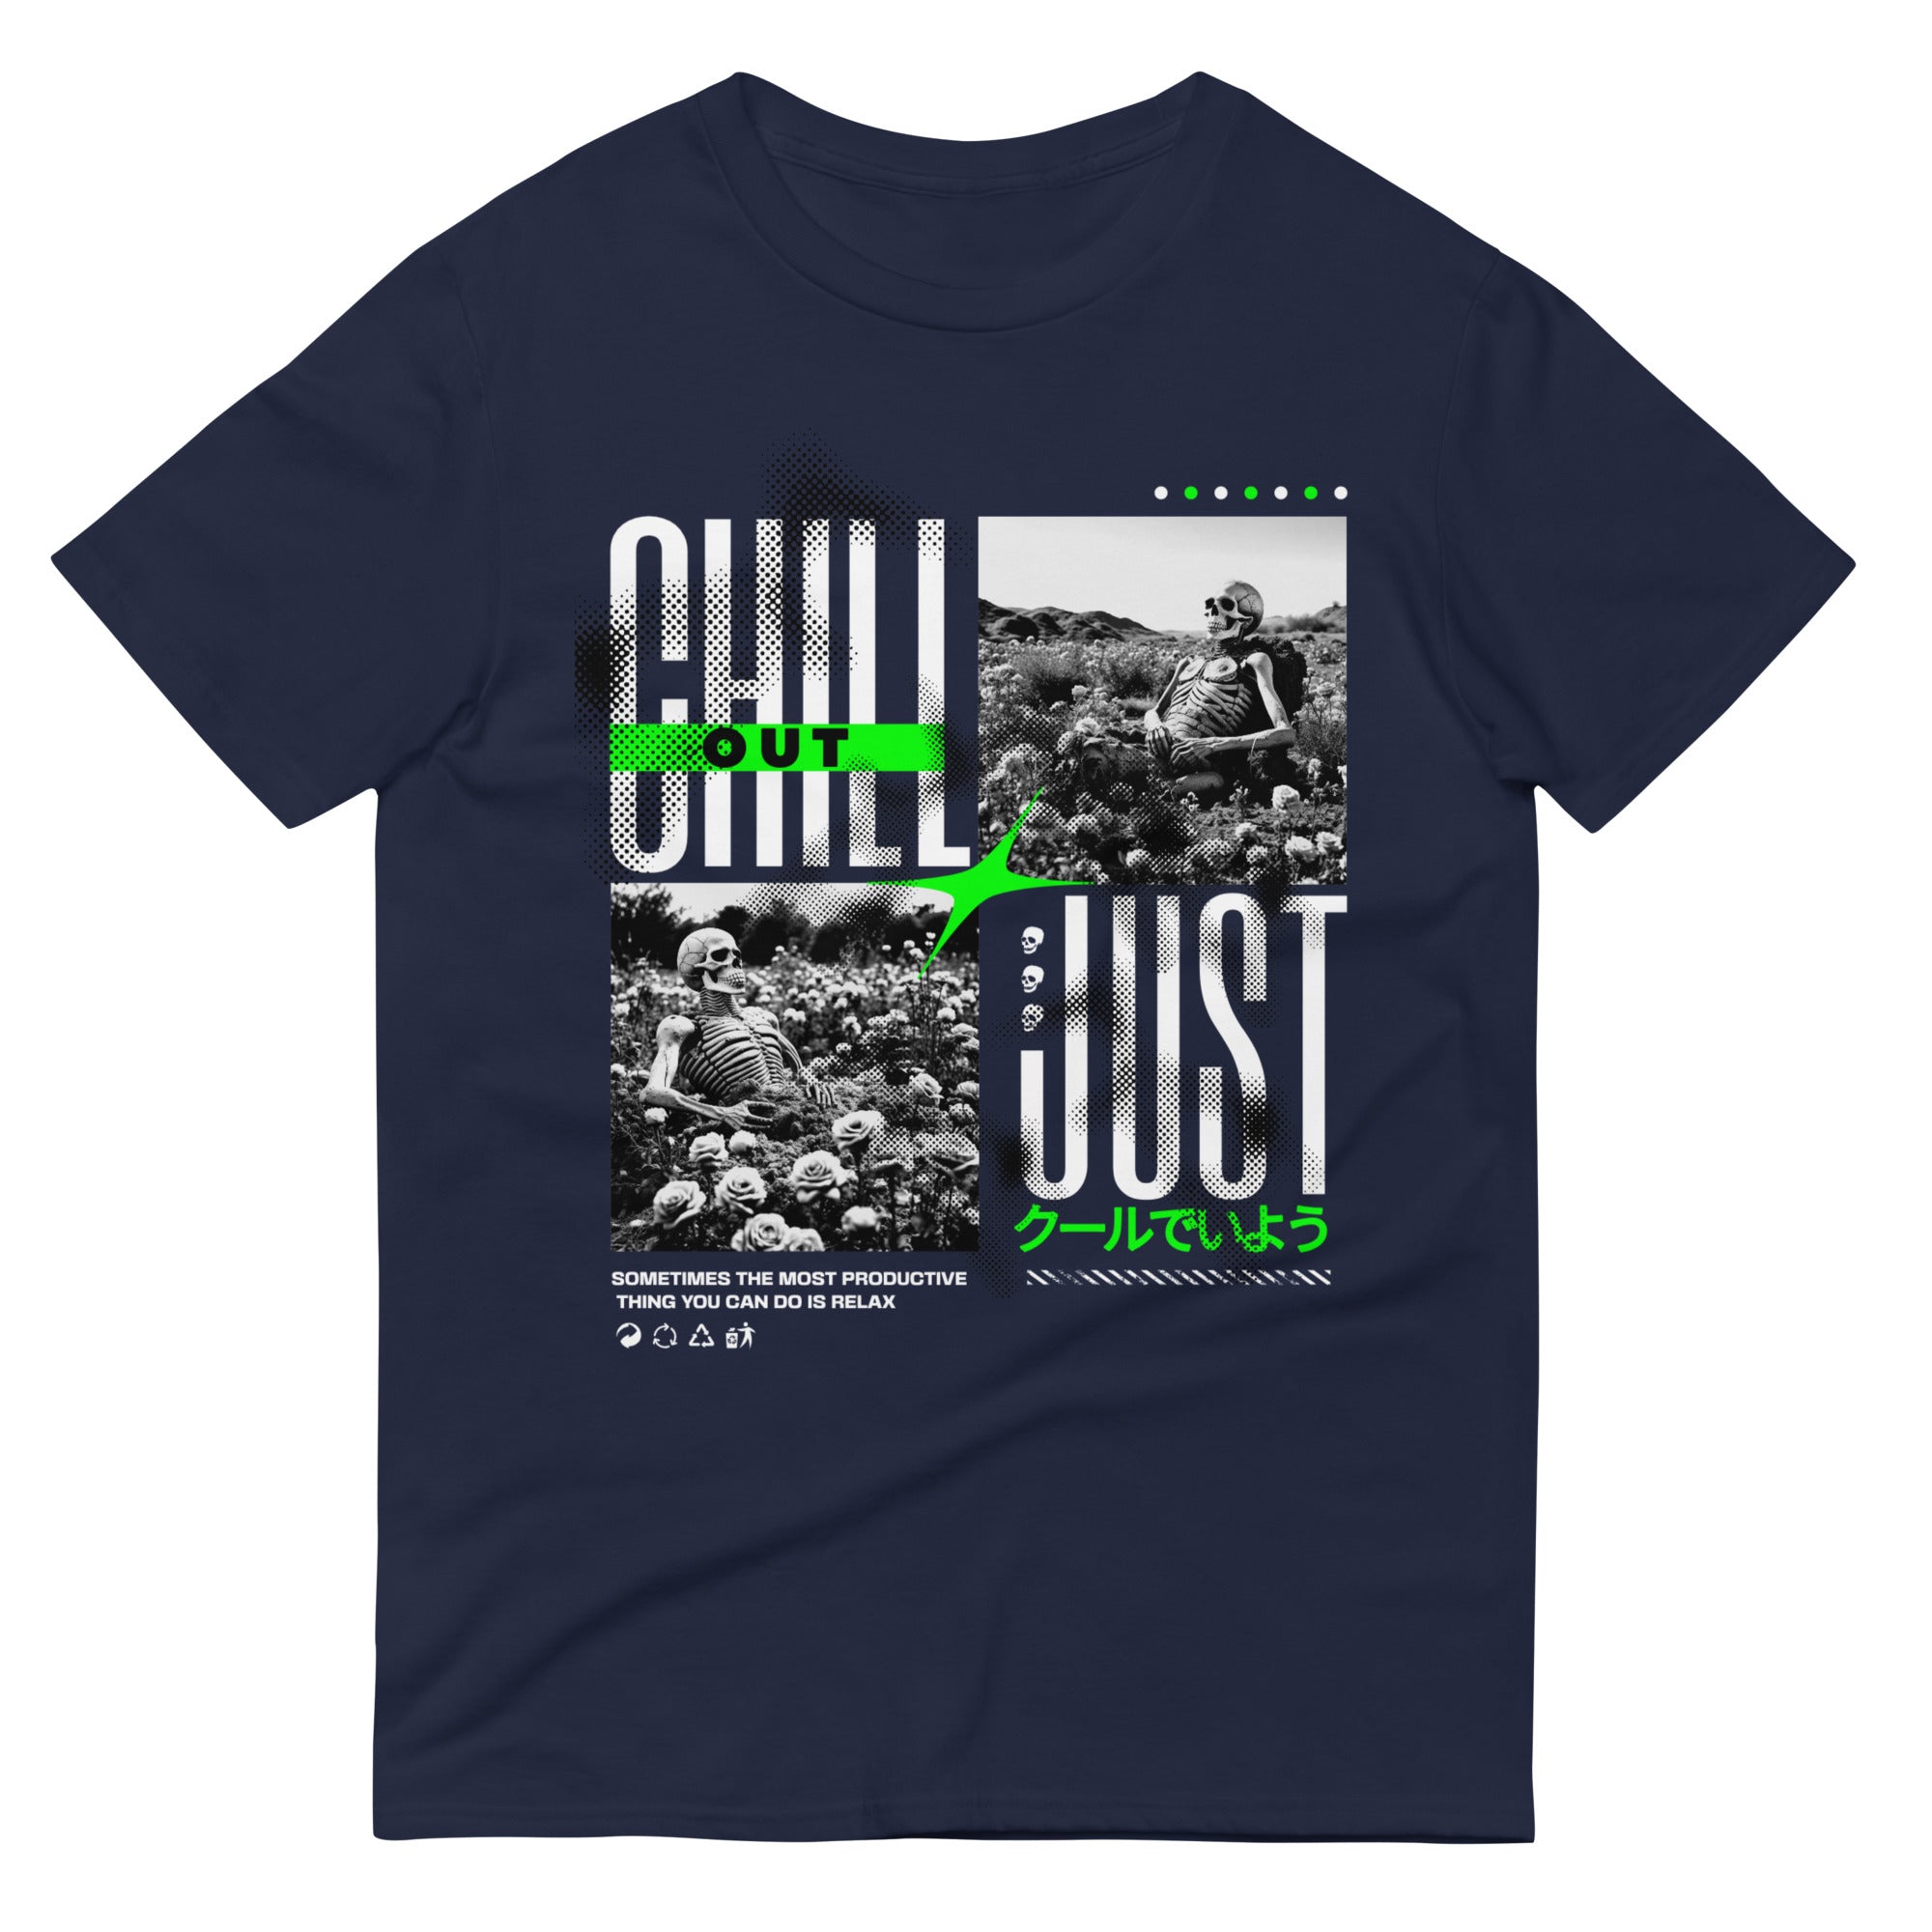 Stay Chill Men's T-Shirt